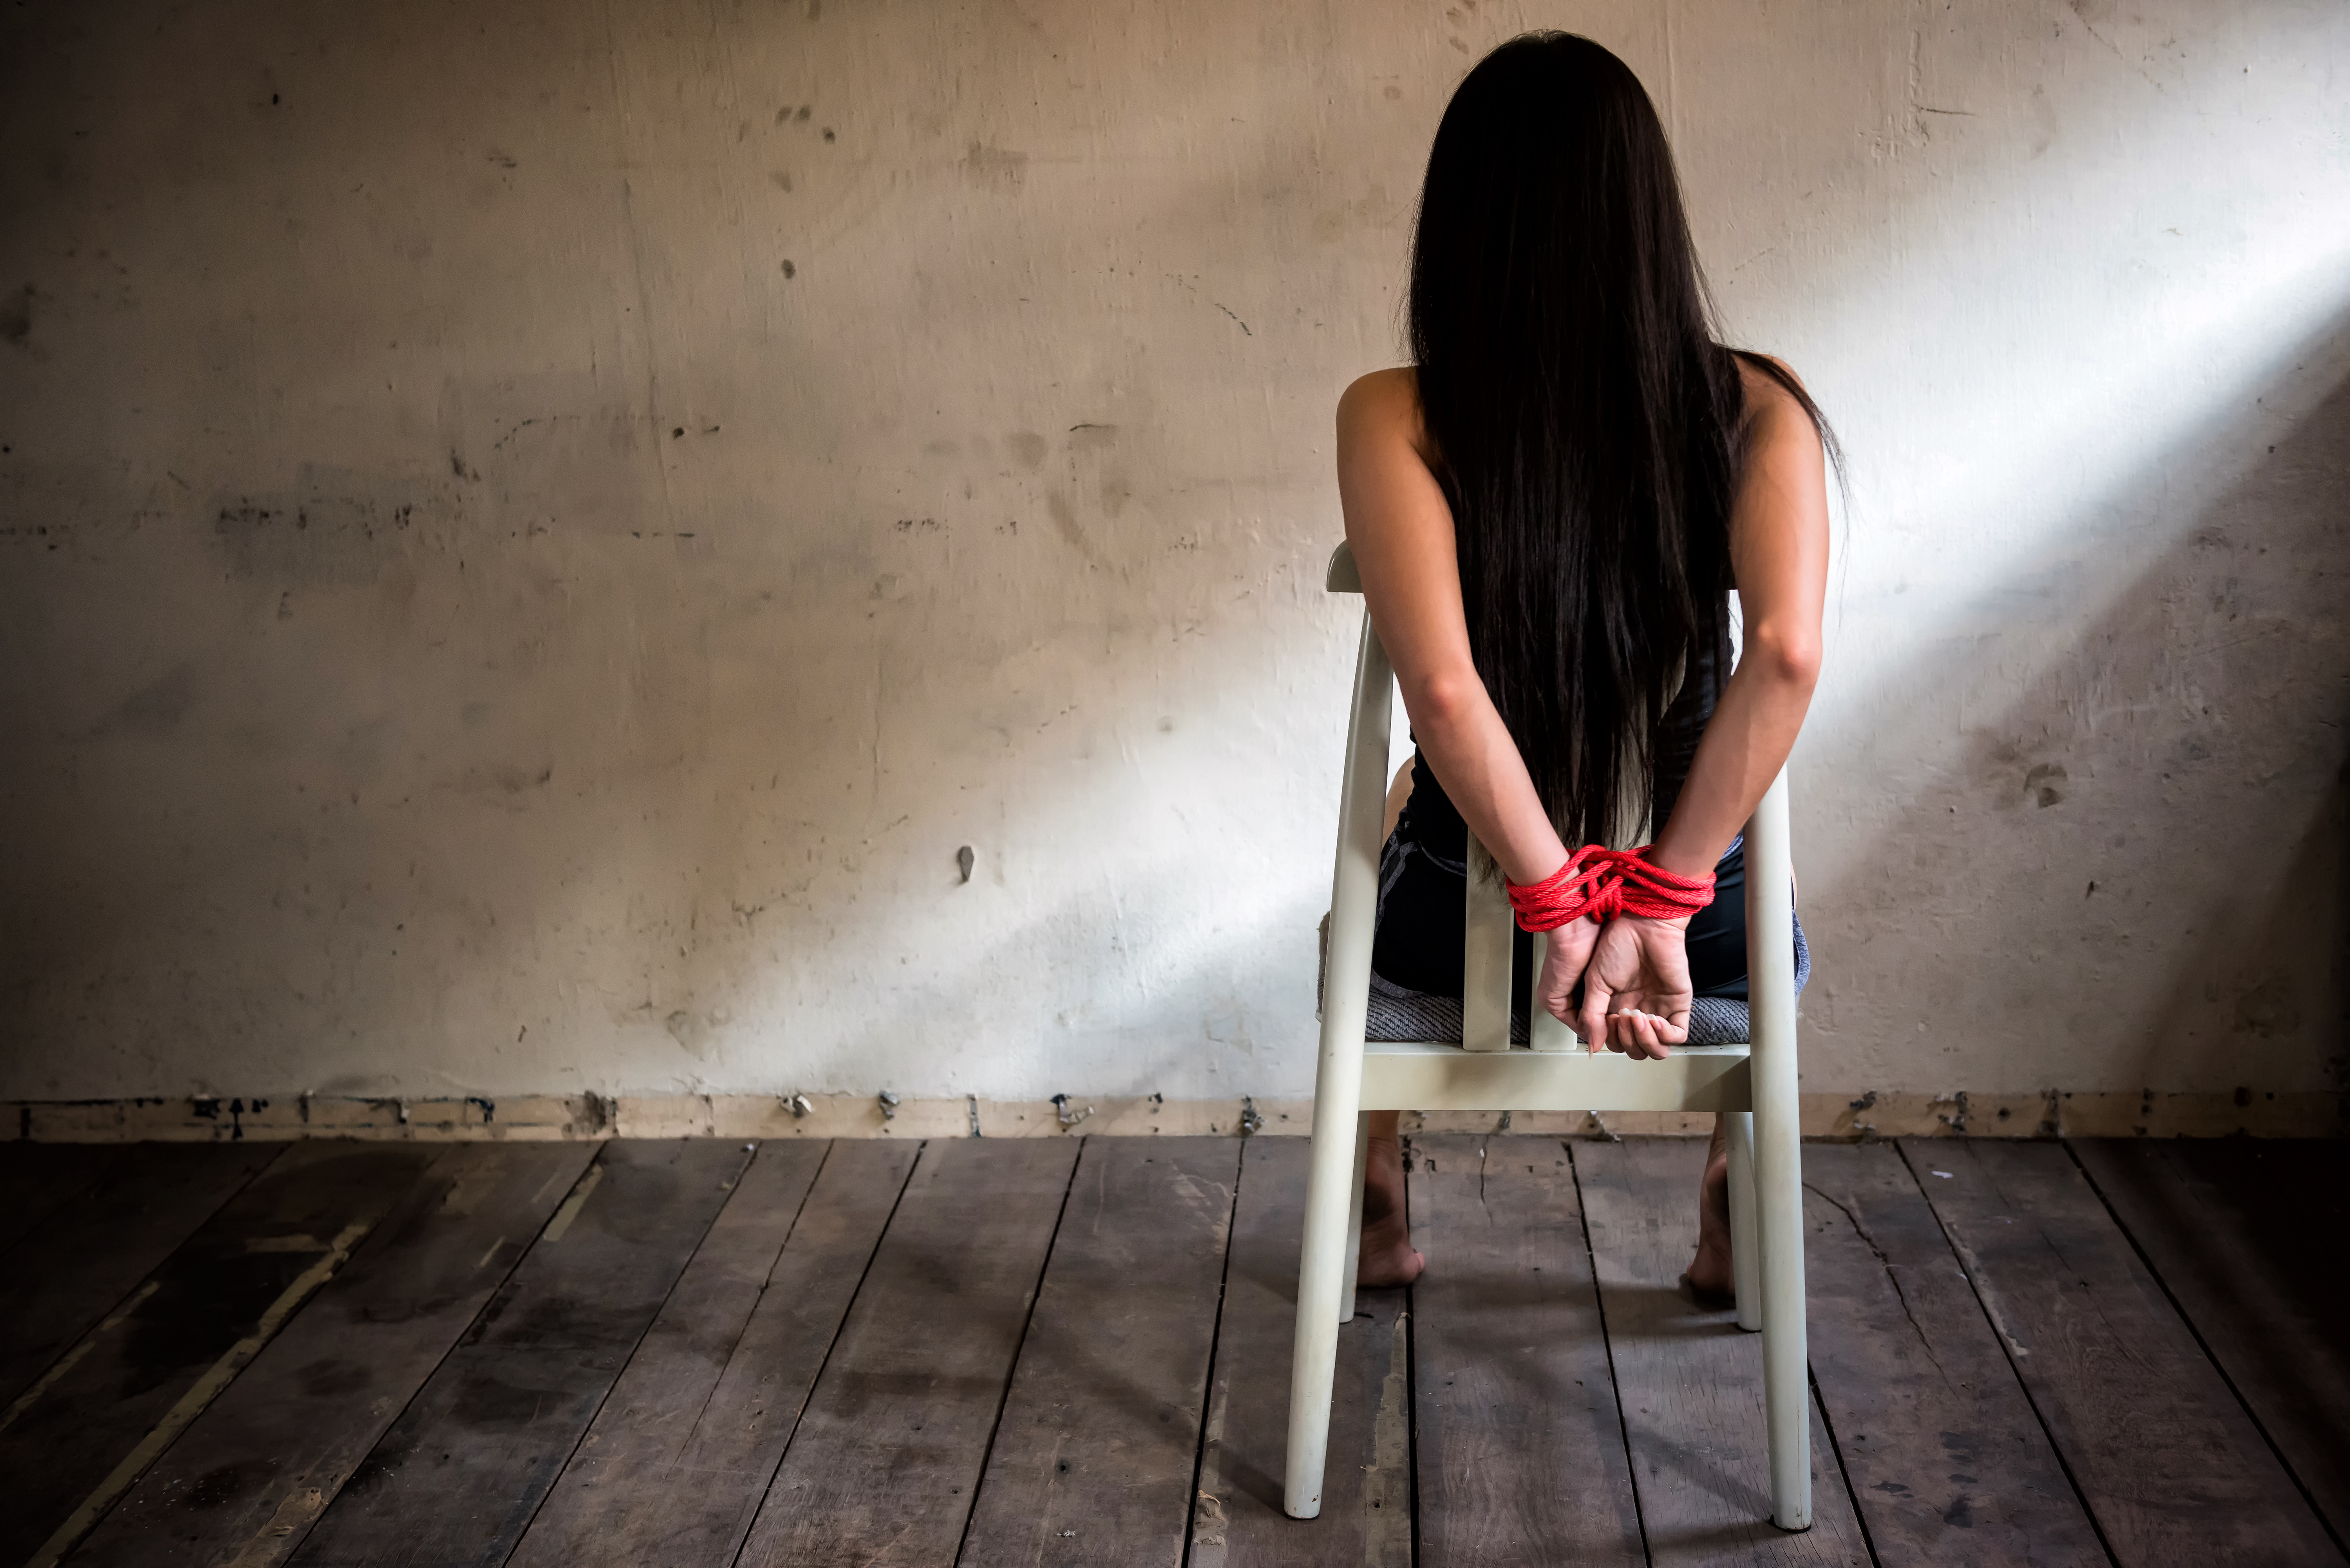 Victim woman tied with red rope sit on chair in abandon house | Source: Shutterstock.com